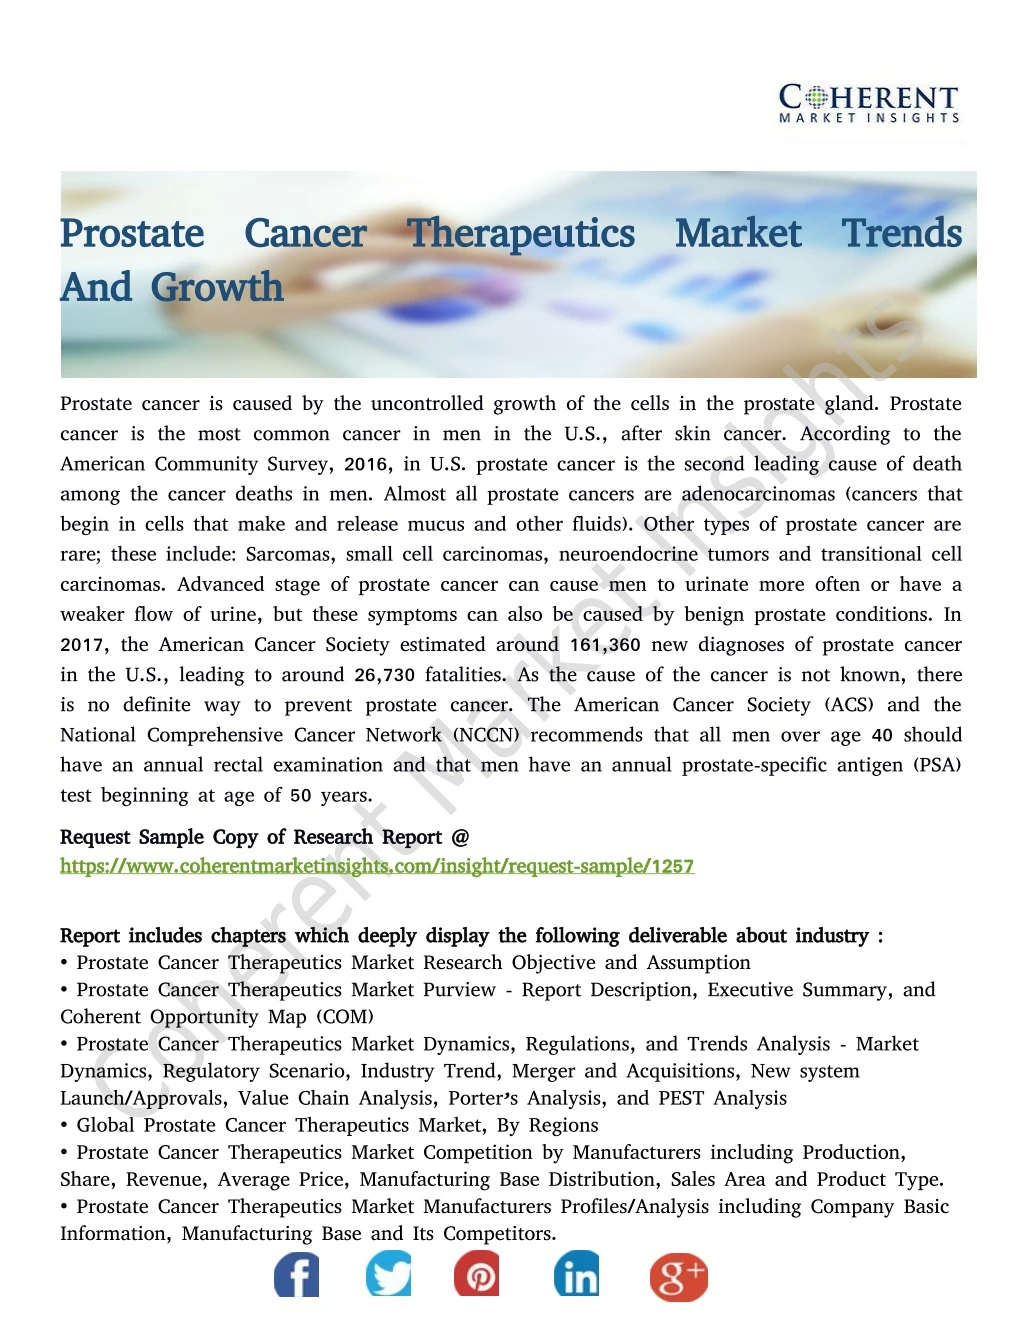 prostate cancer therapeutics market trends